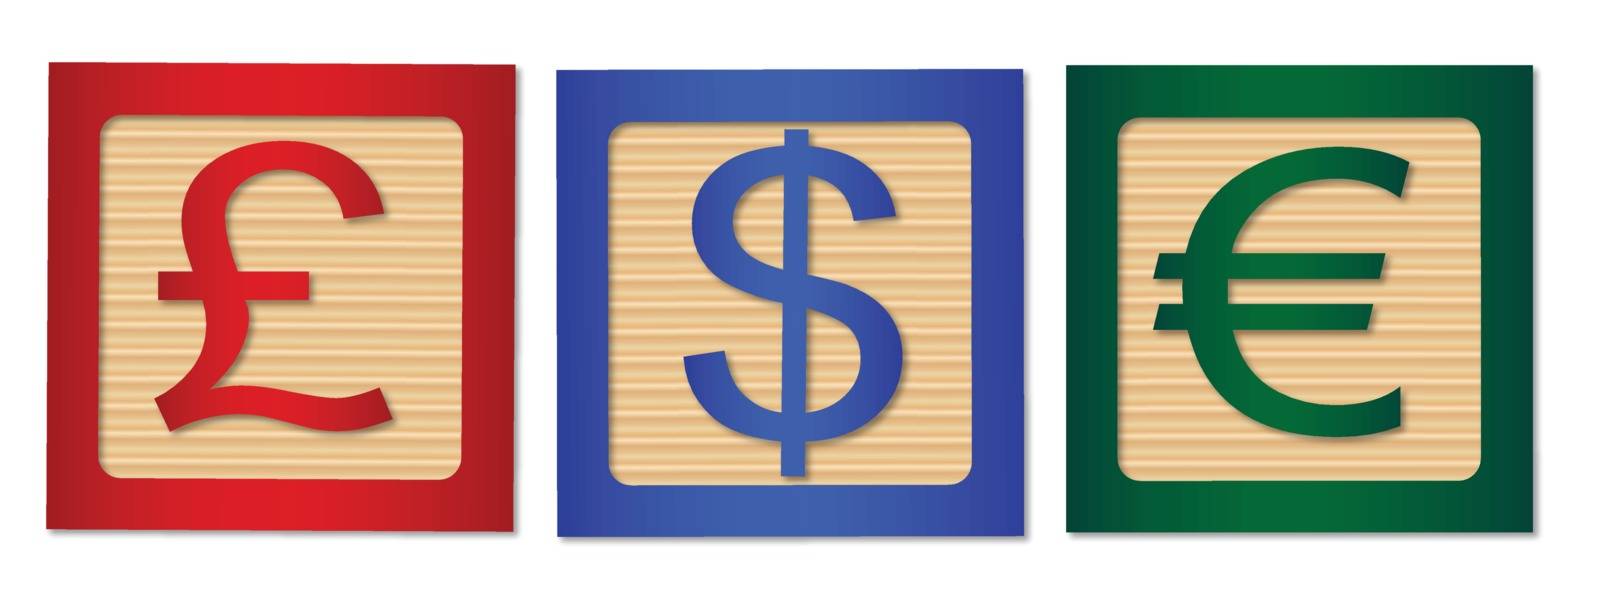 Wooden blocks giving the financial signs for Dollar, Pound and Euro